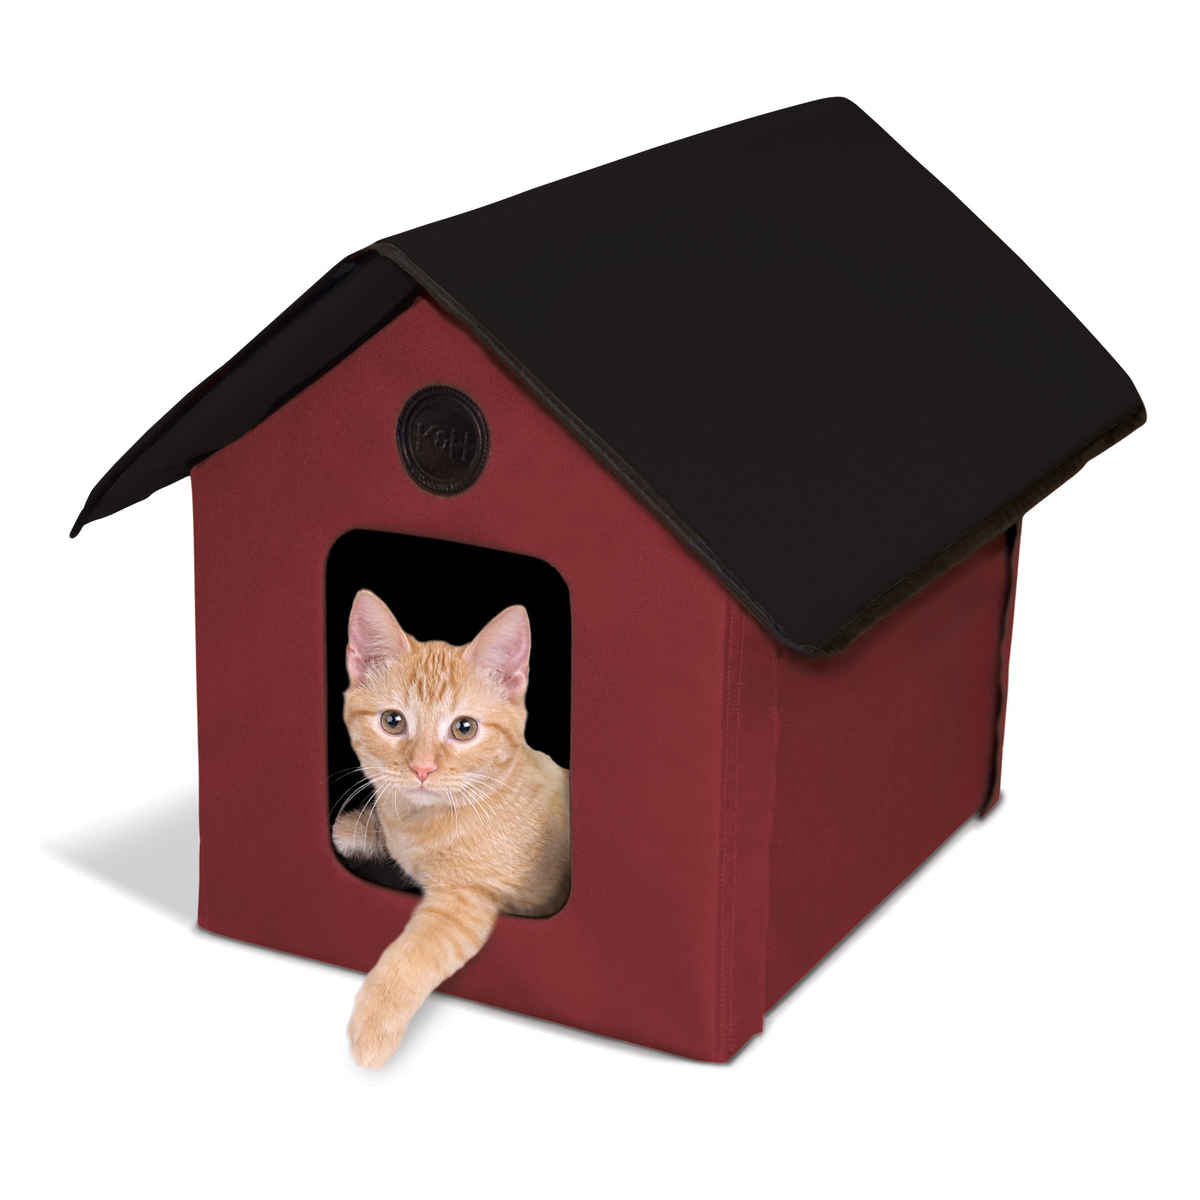 K&h Pet Products Kh3995 Unheated Outdoor Kitty House